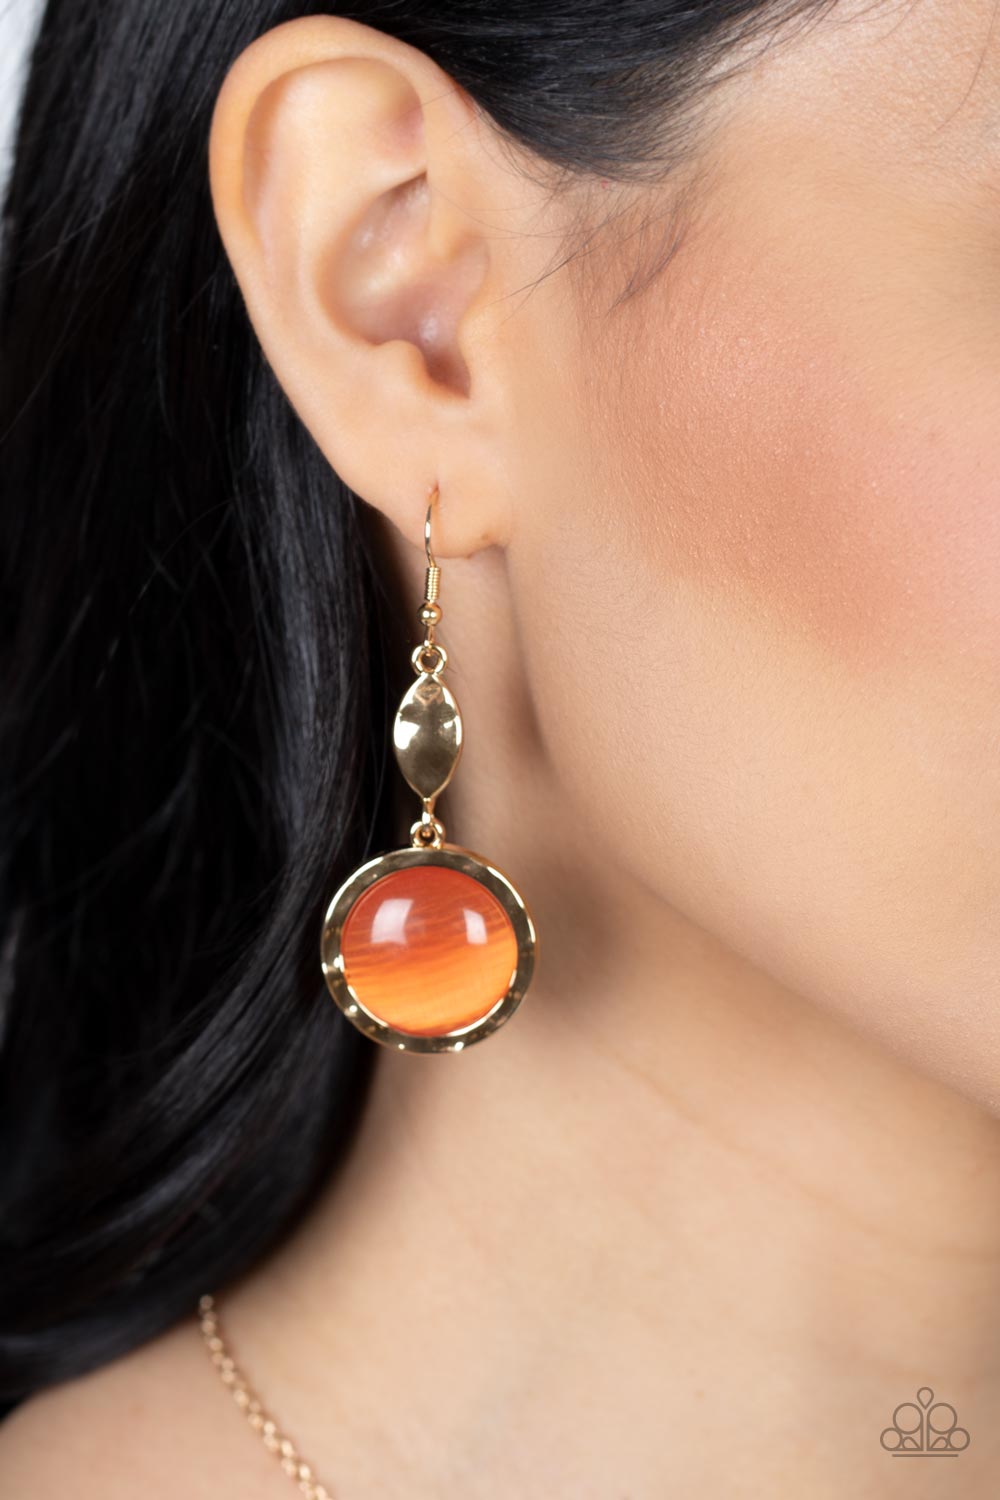 Magically Magnificent - Orange Earrings - Paparazzi Accessories